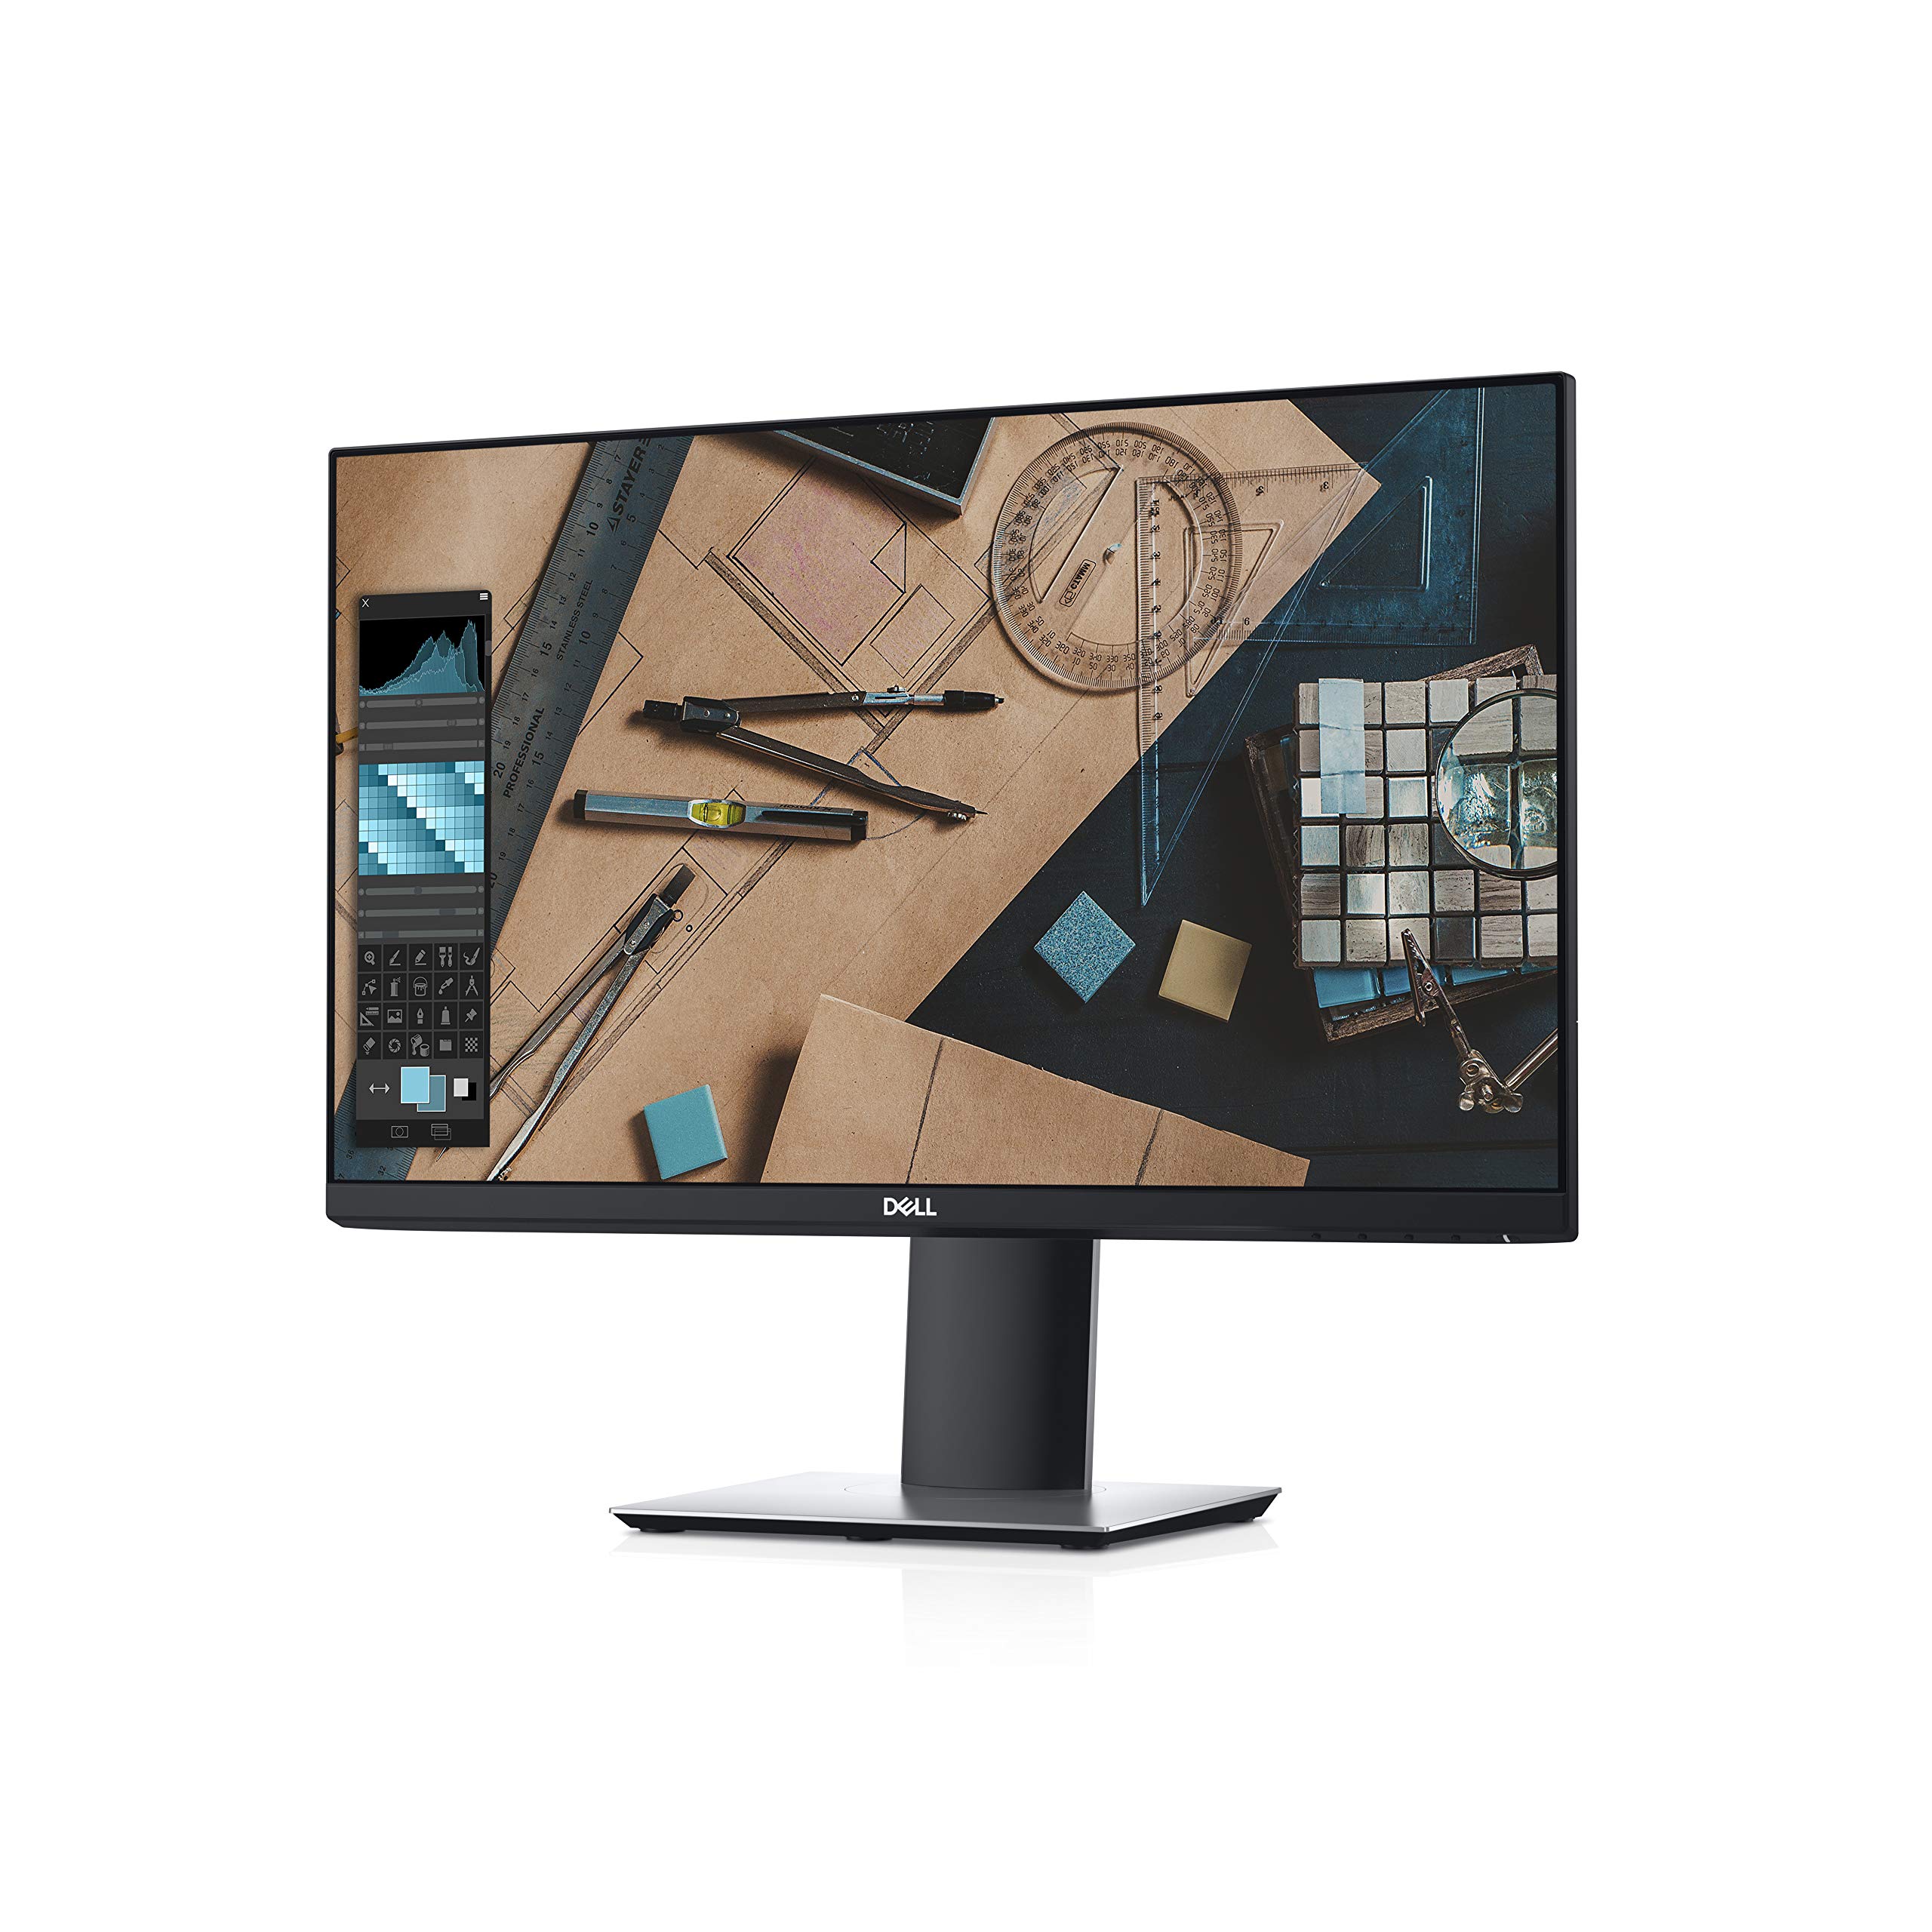 Book Cover Dell P Series 23-Inch FHD 1080p Screen LED-lit Monitor (P2319H),Black